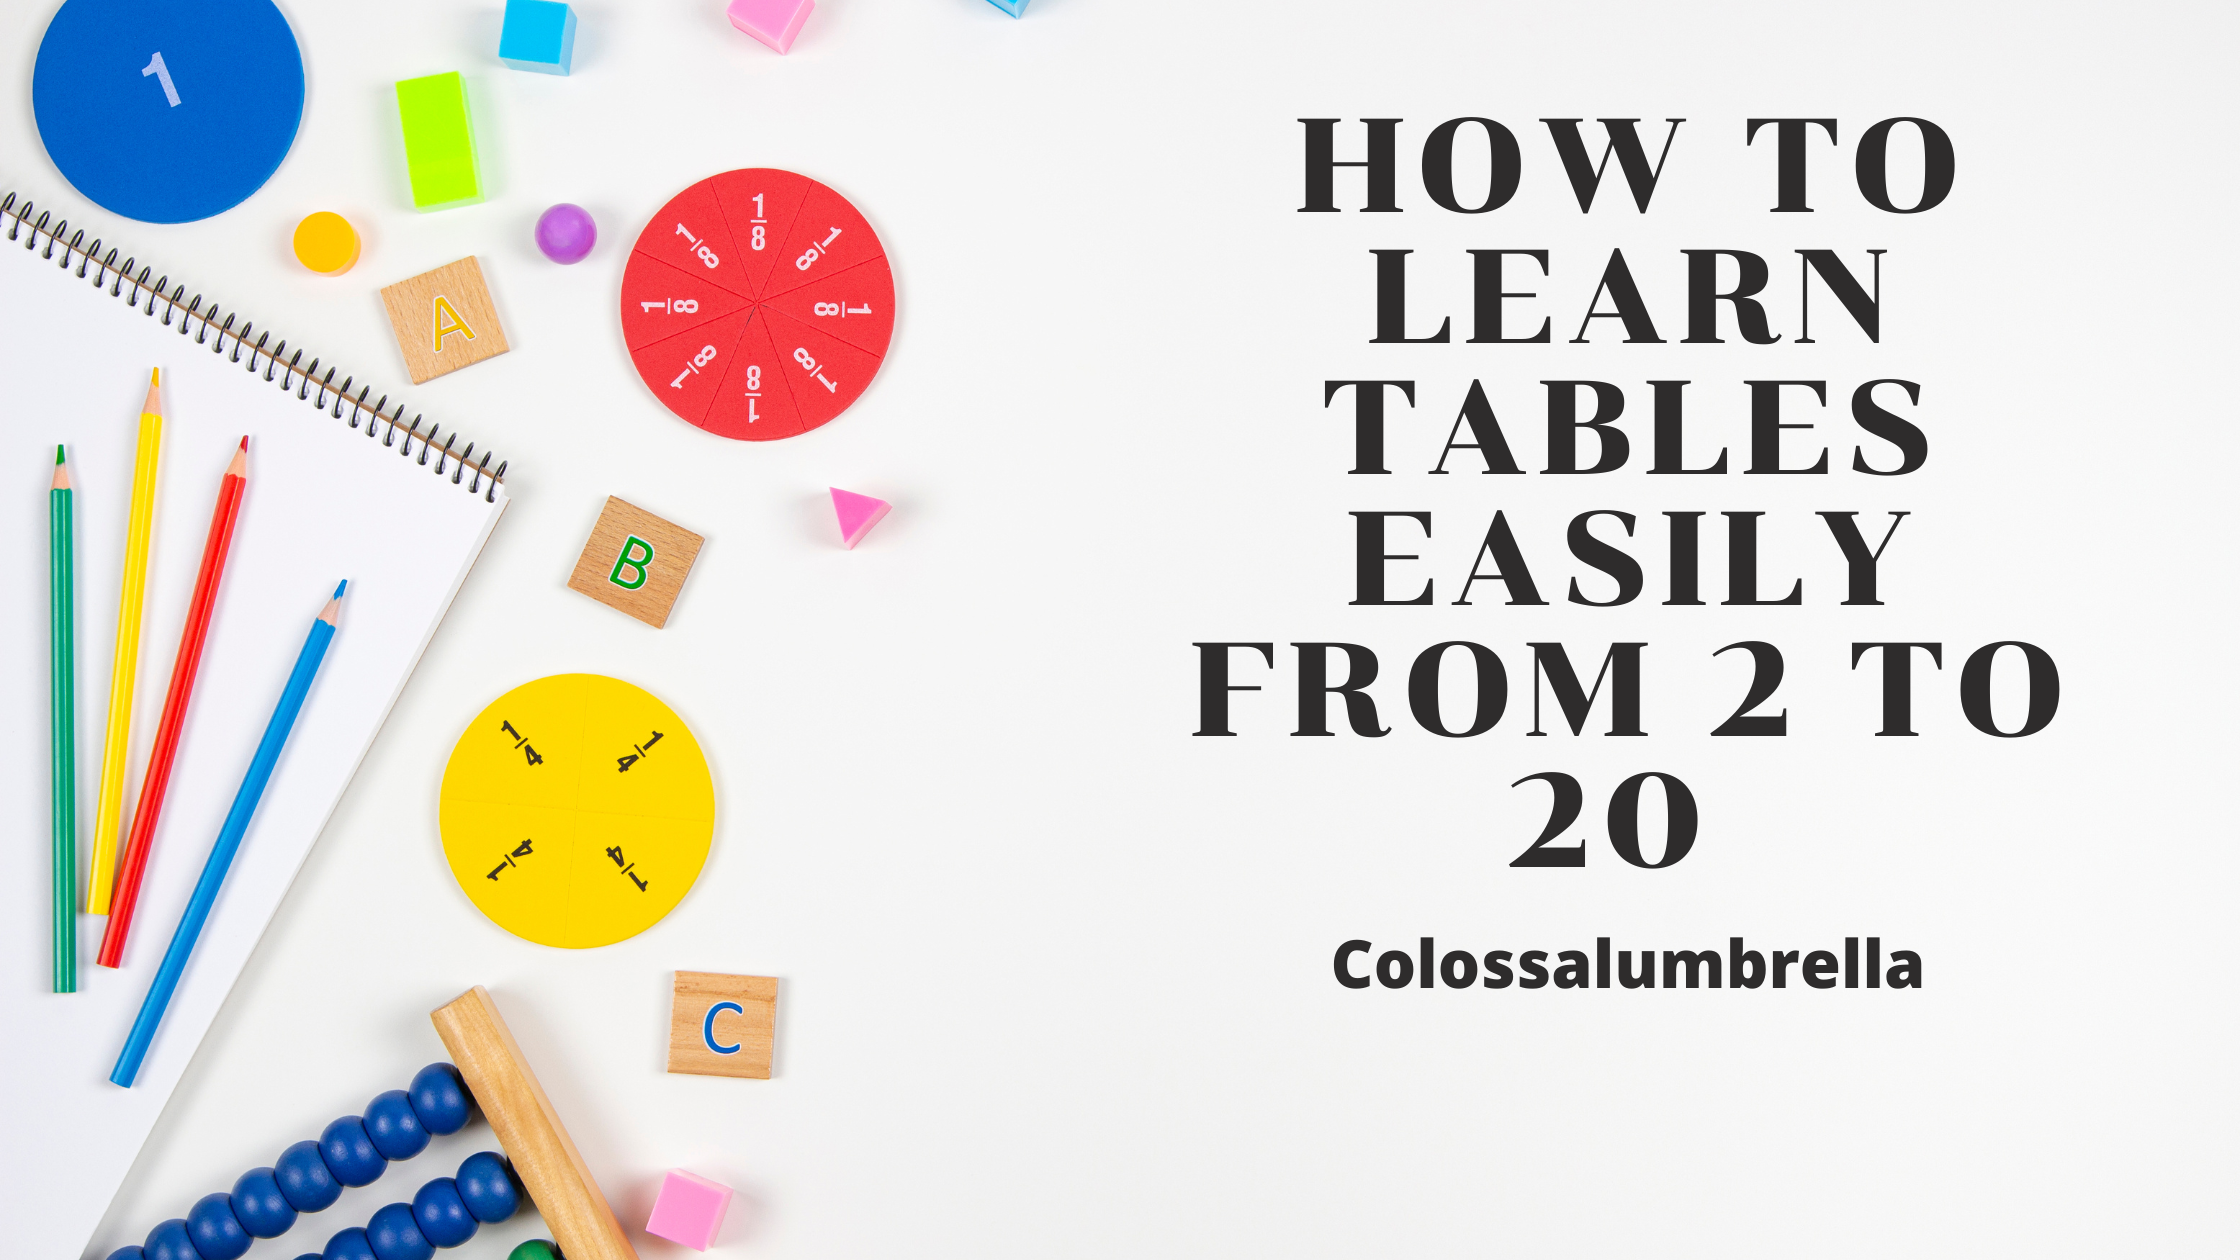 10 Effortless ways on how to learn tables easily from 2 to 20 orally